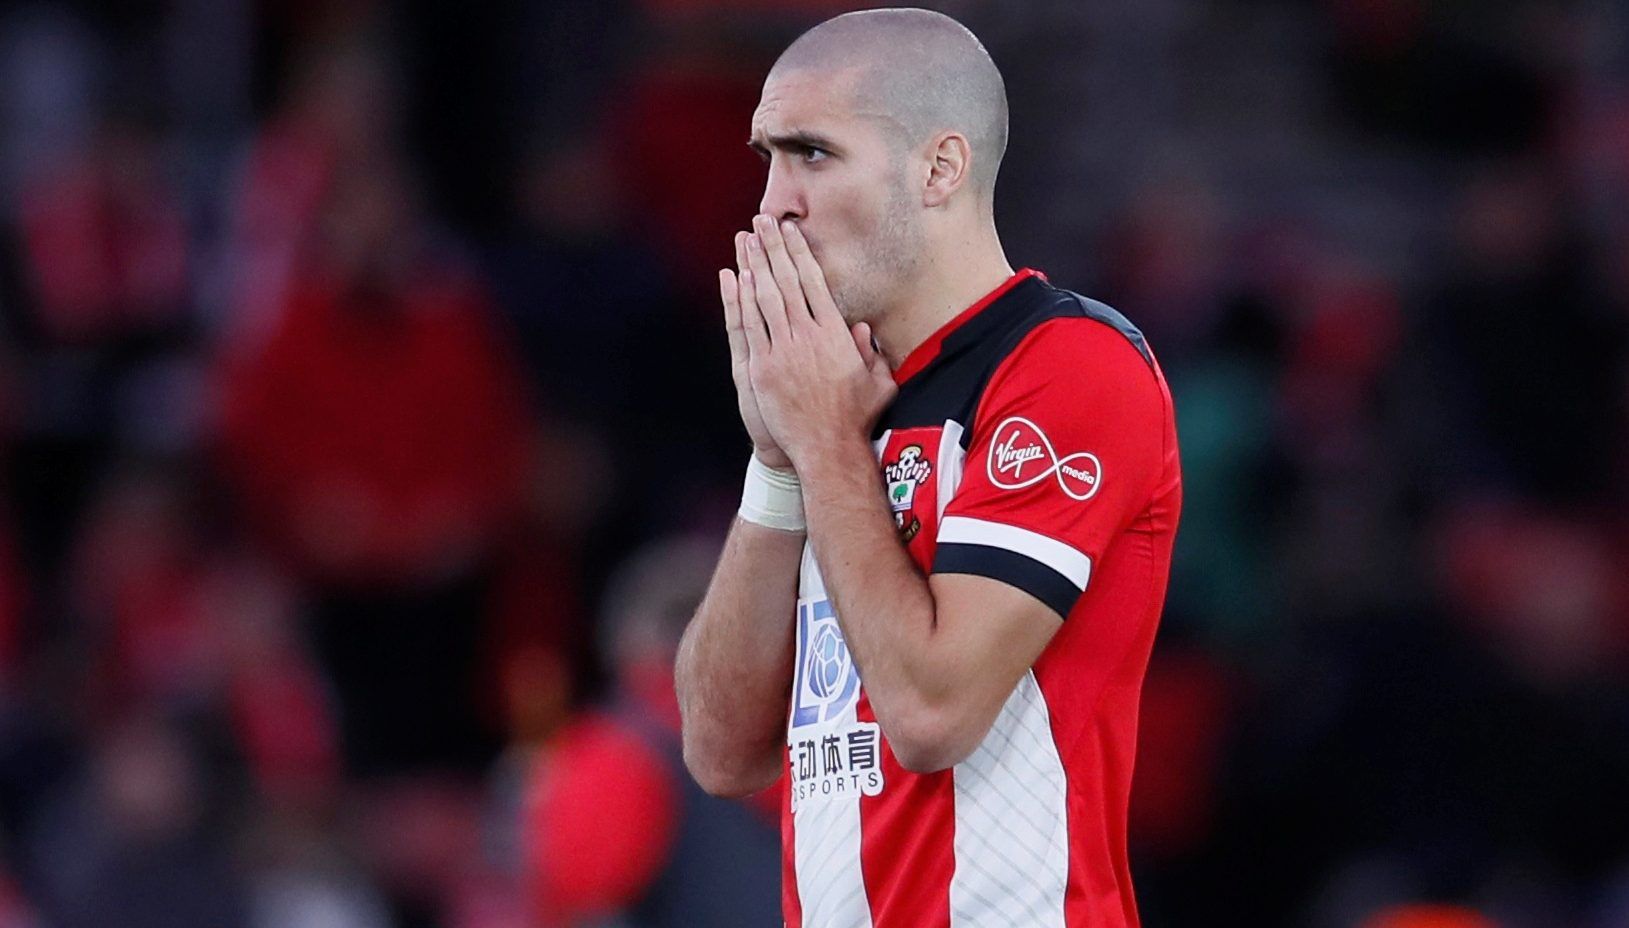 Soccer Football - Premier League - Southampton v Everton - St Mary's Stadium, Southampton, Britain - November 9, 2019  Southampton's Oriol Romeu reacts         REUTERS/David Klein  EDITORIAL USE ONLY. No use with unauthorized audio, video, data, fixture lists, club/league logos or 